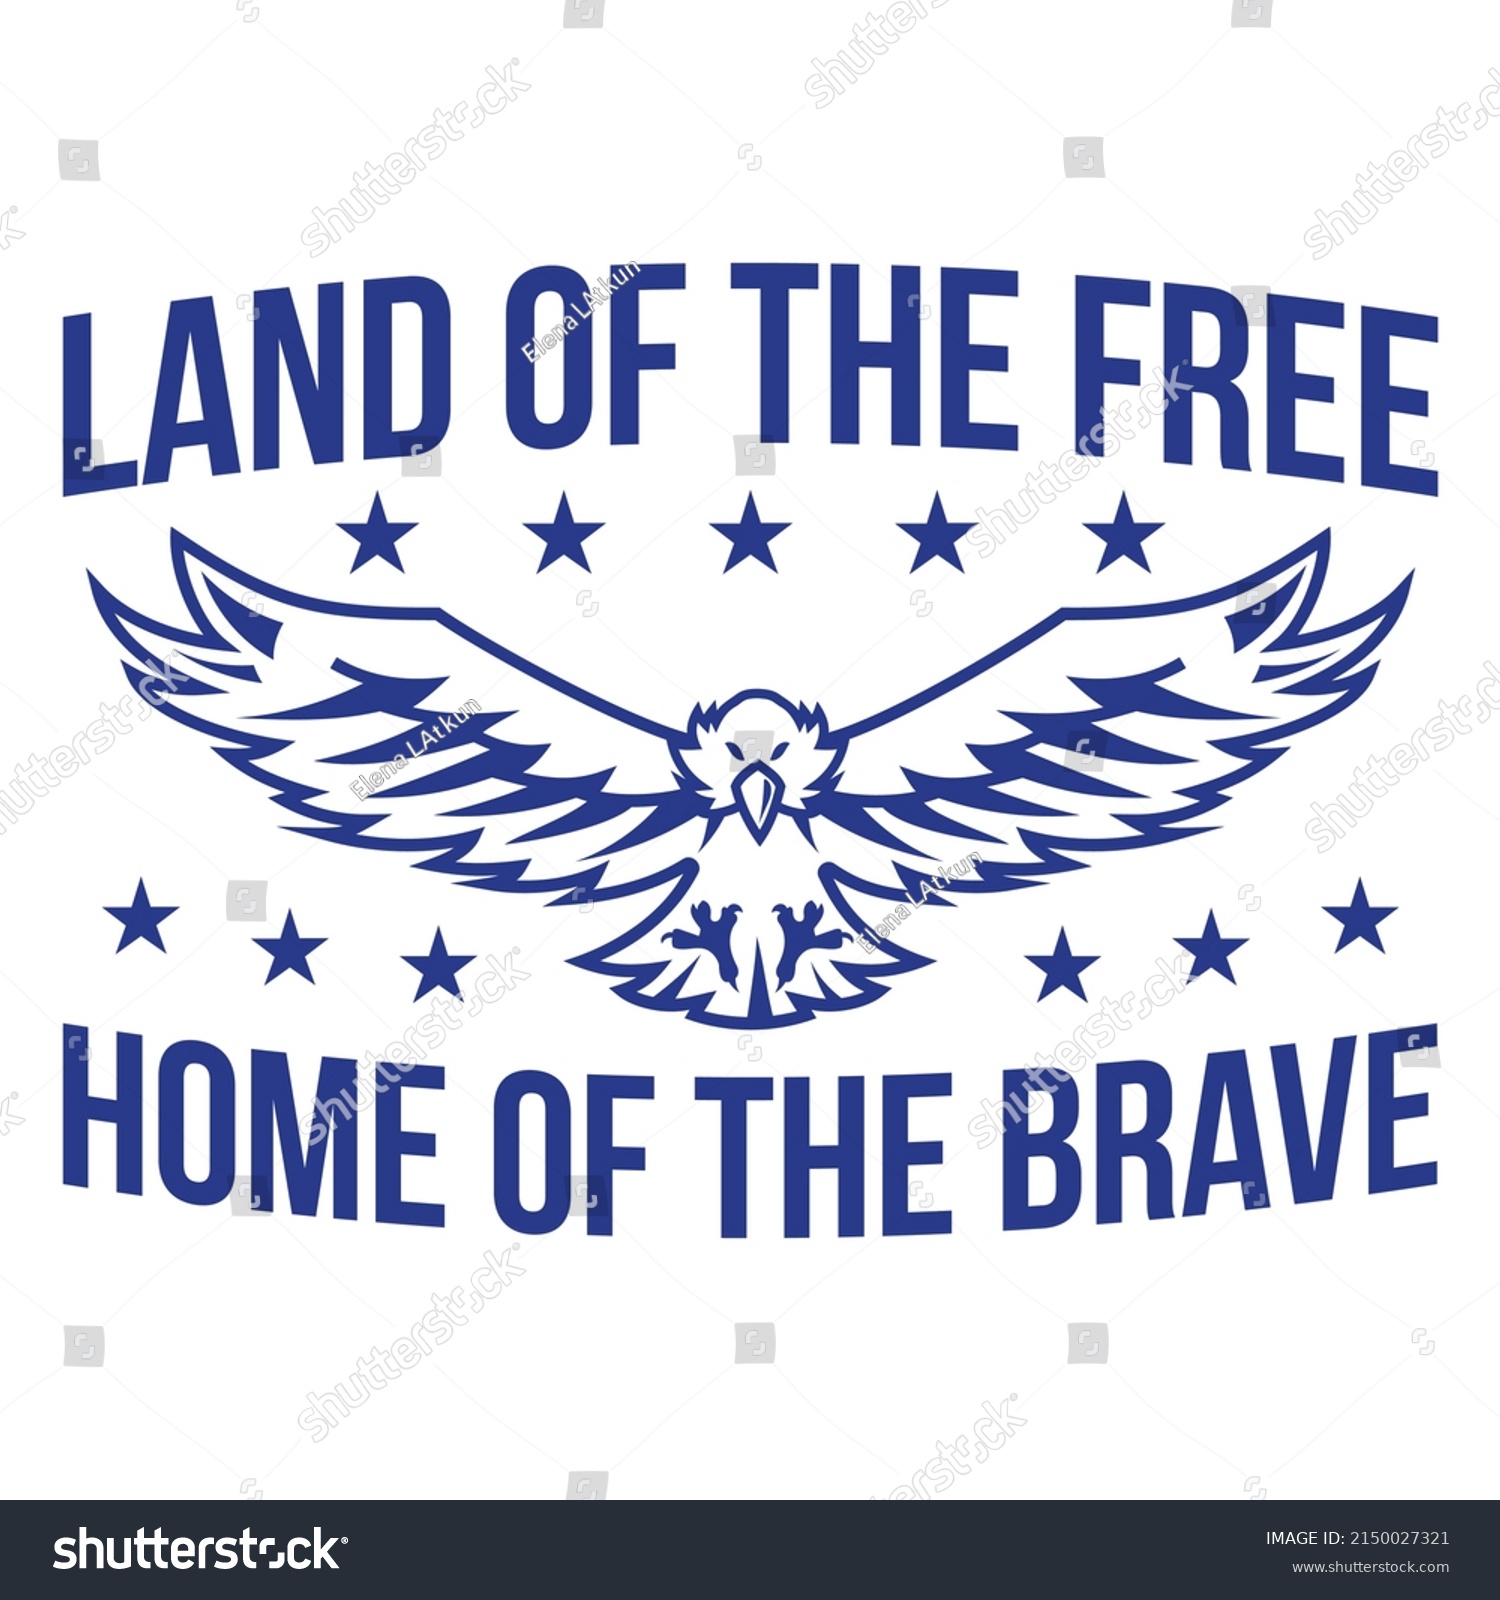 SVG of Land Of The Ffree Home Of The Brave Badge. High quality vector svg